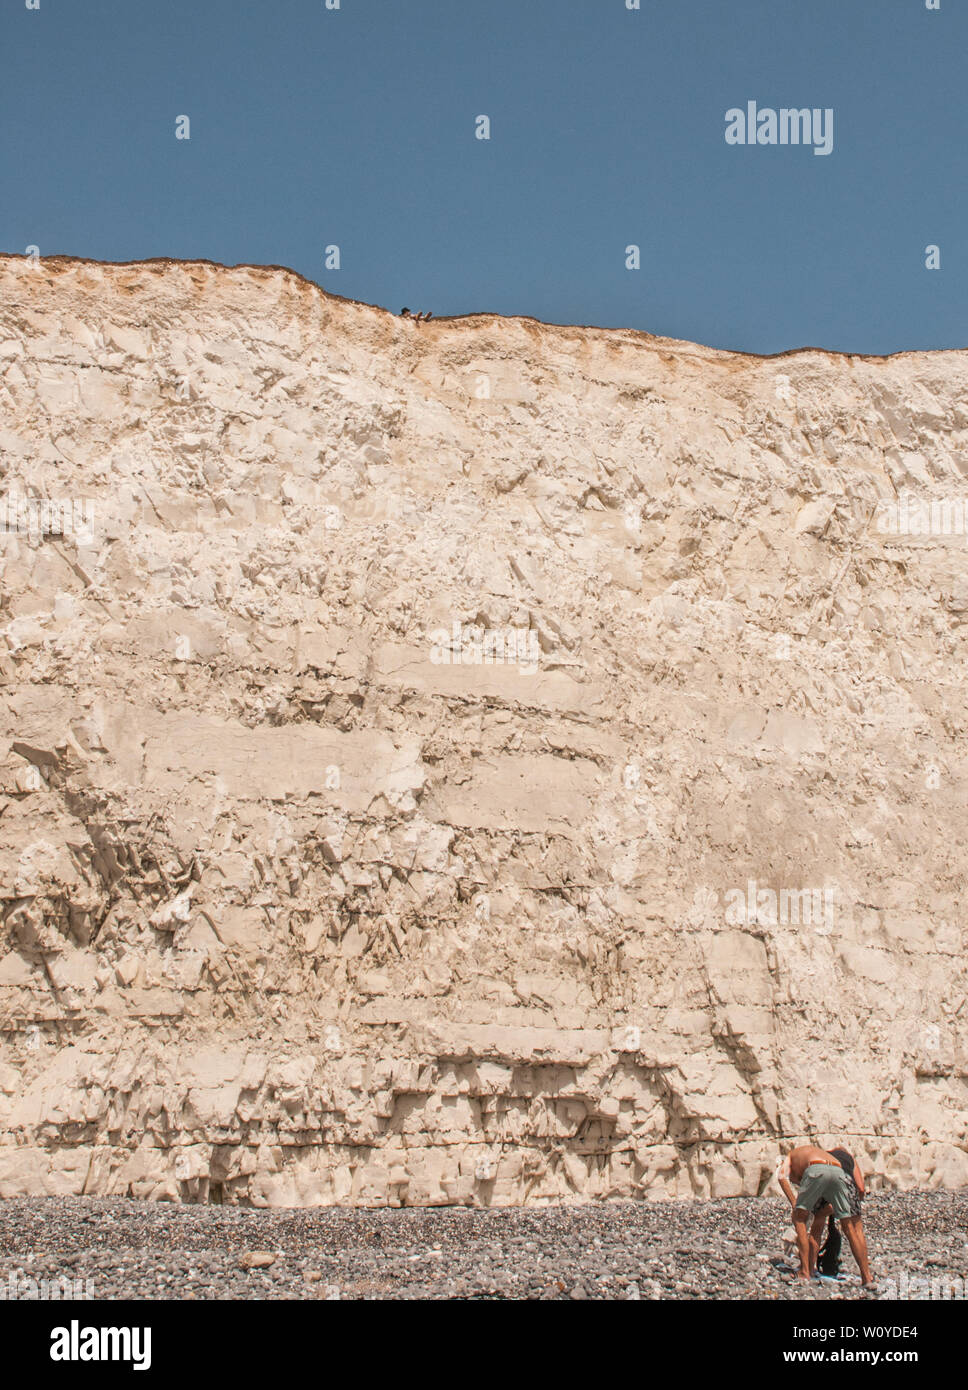 Birling Gap, Eastbourne, East Sussex. 28 June 2019. UK Weather:Look carefully. Top of cliff, feet over edge .Some seem unaware of the fragility & undercutting along the chalk cliffs. Rock falls occuring frequently. It is not safe on the edge. Please keep safe. . Stock Photo